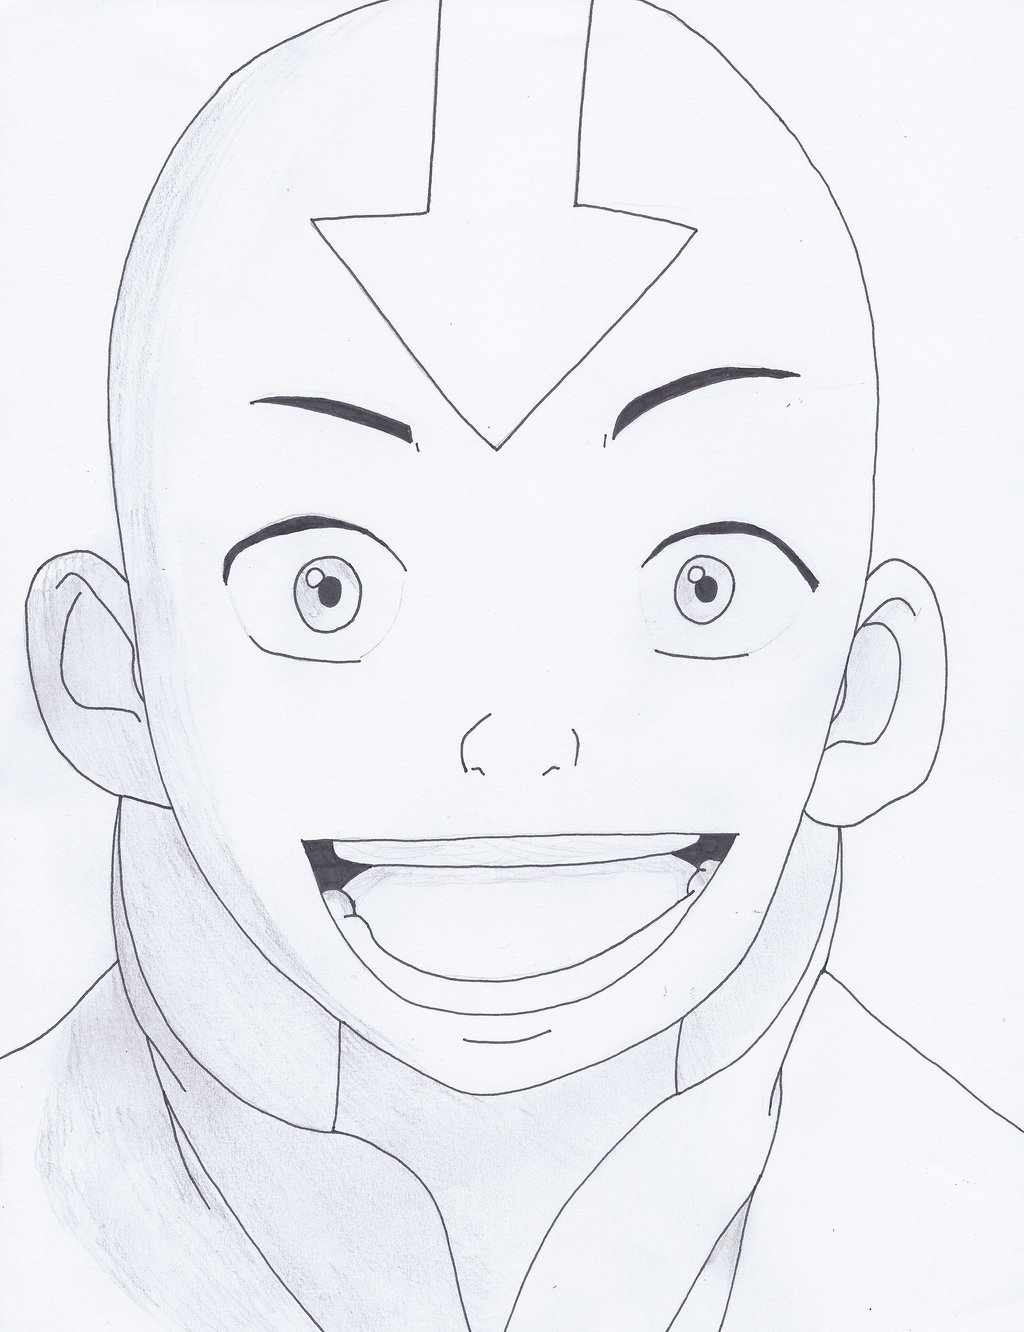 The Best Free Aang Drawing Images Download From 33 Free Drawings Of Aang At Getdrawings 5494